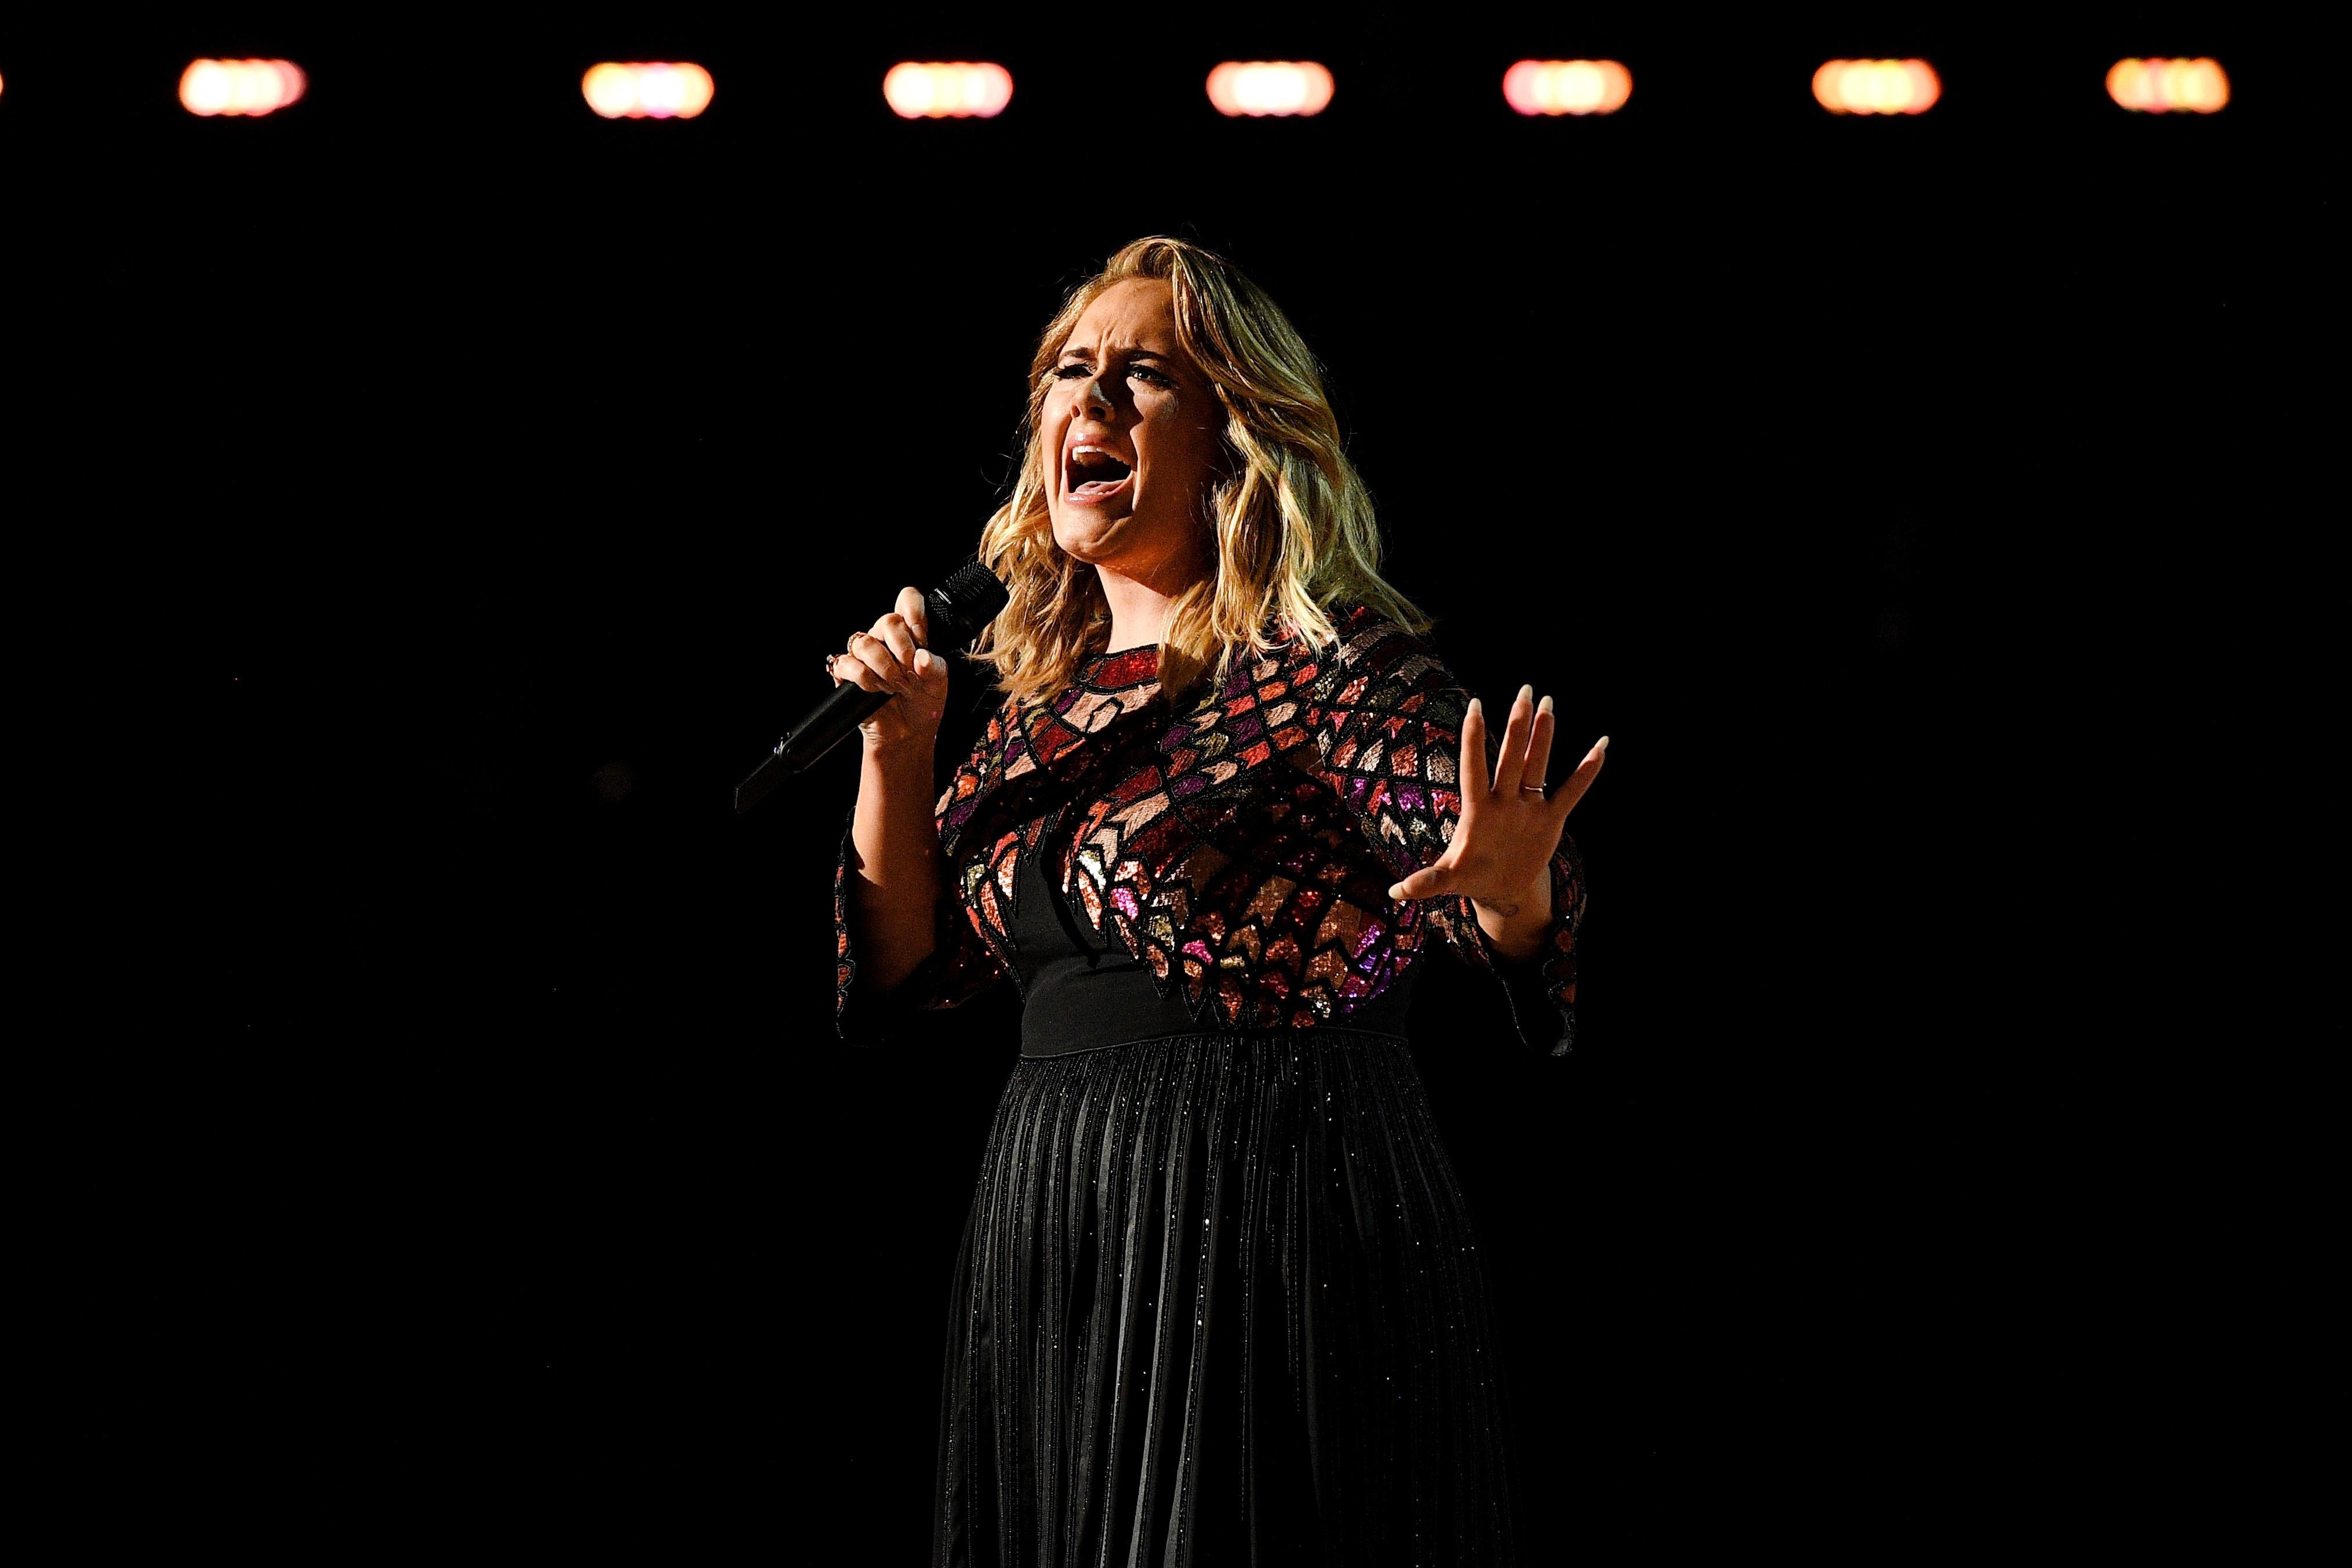 Adele sings into a microphone against a black backdrop.